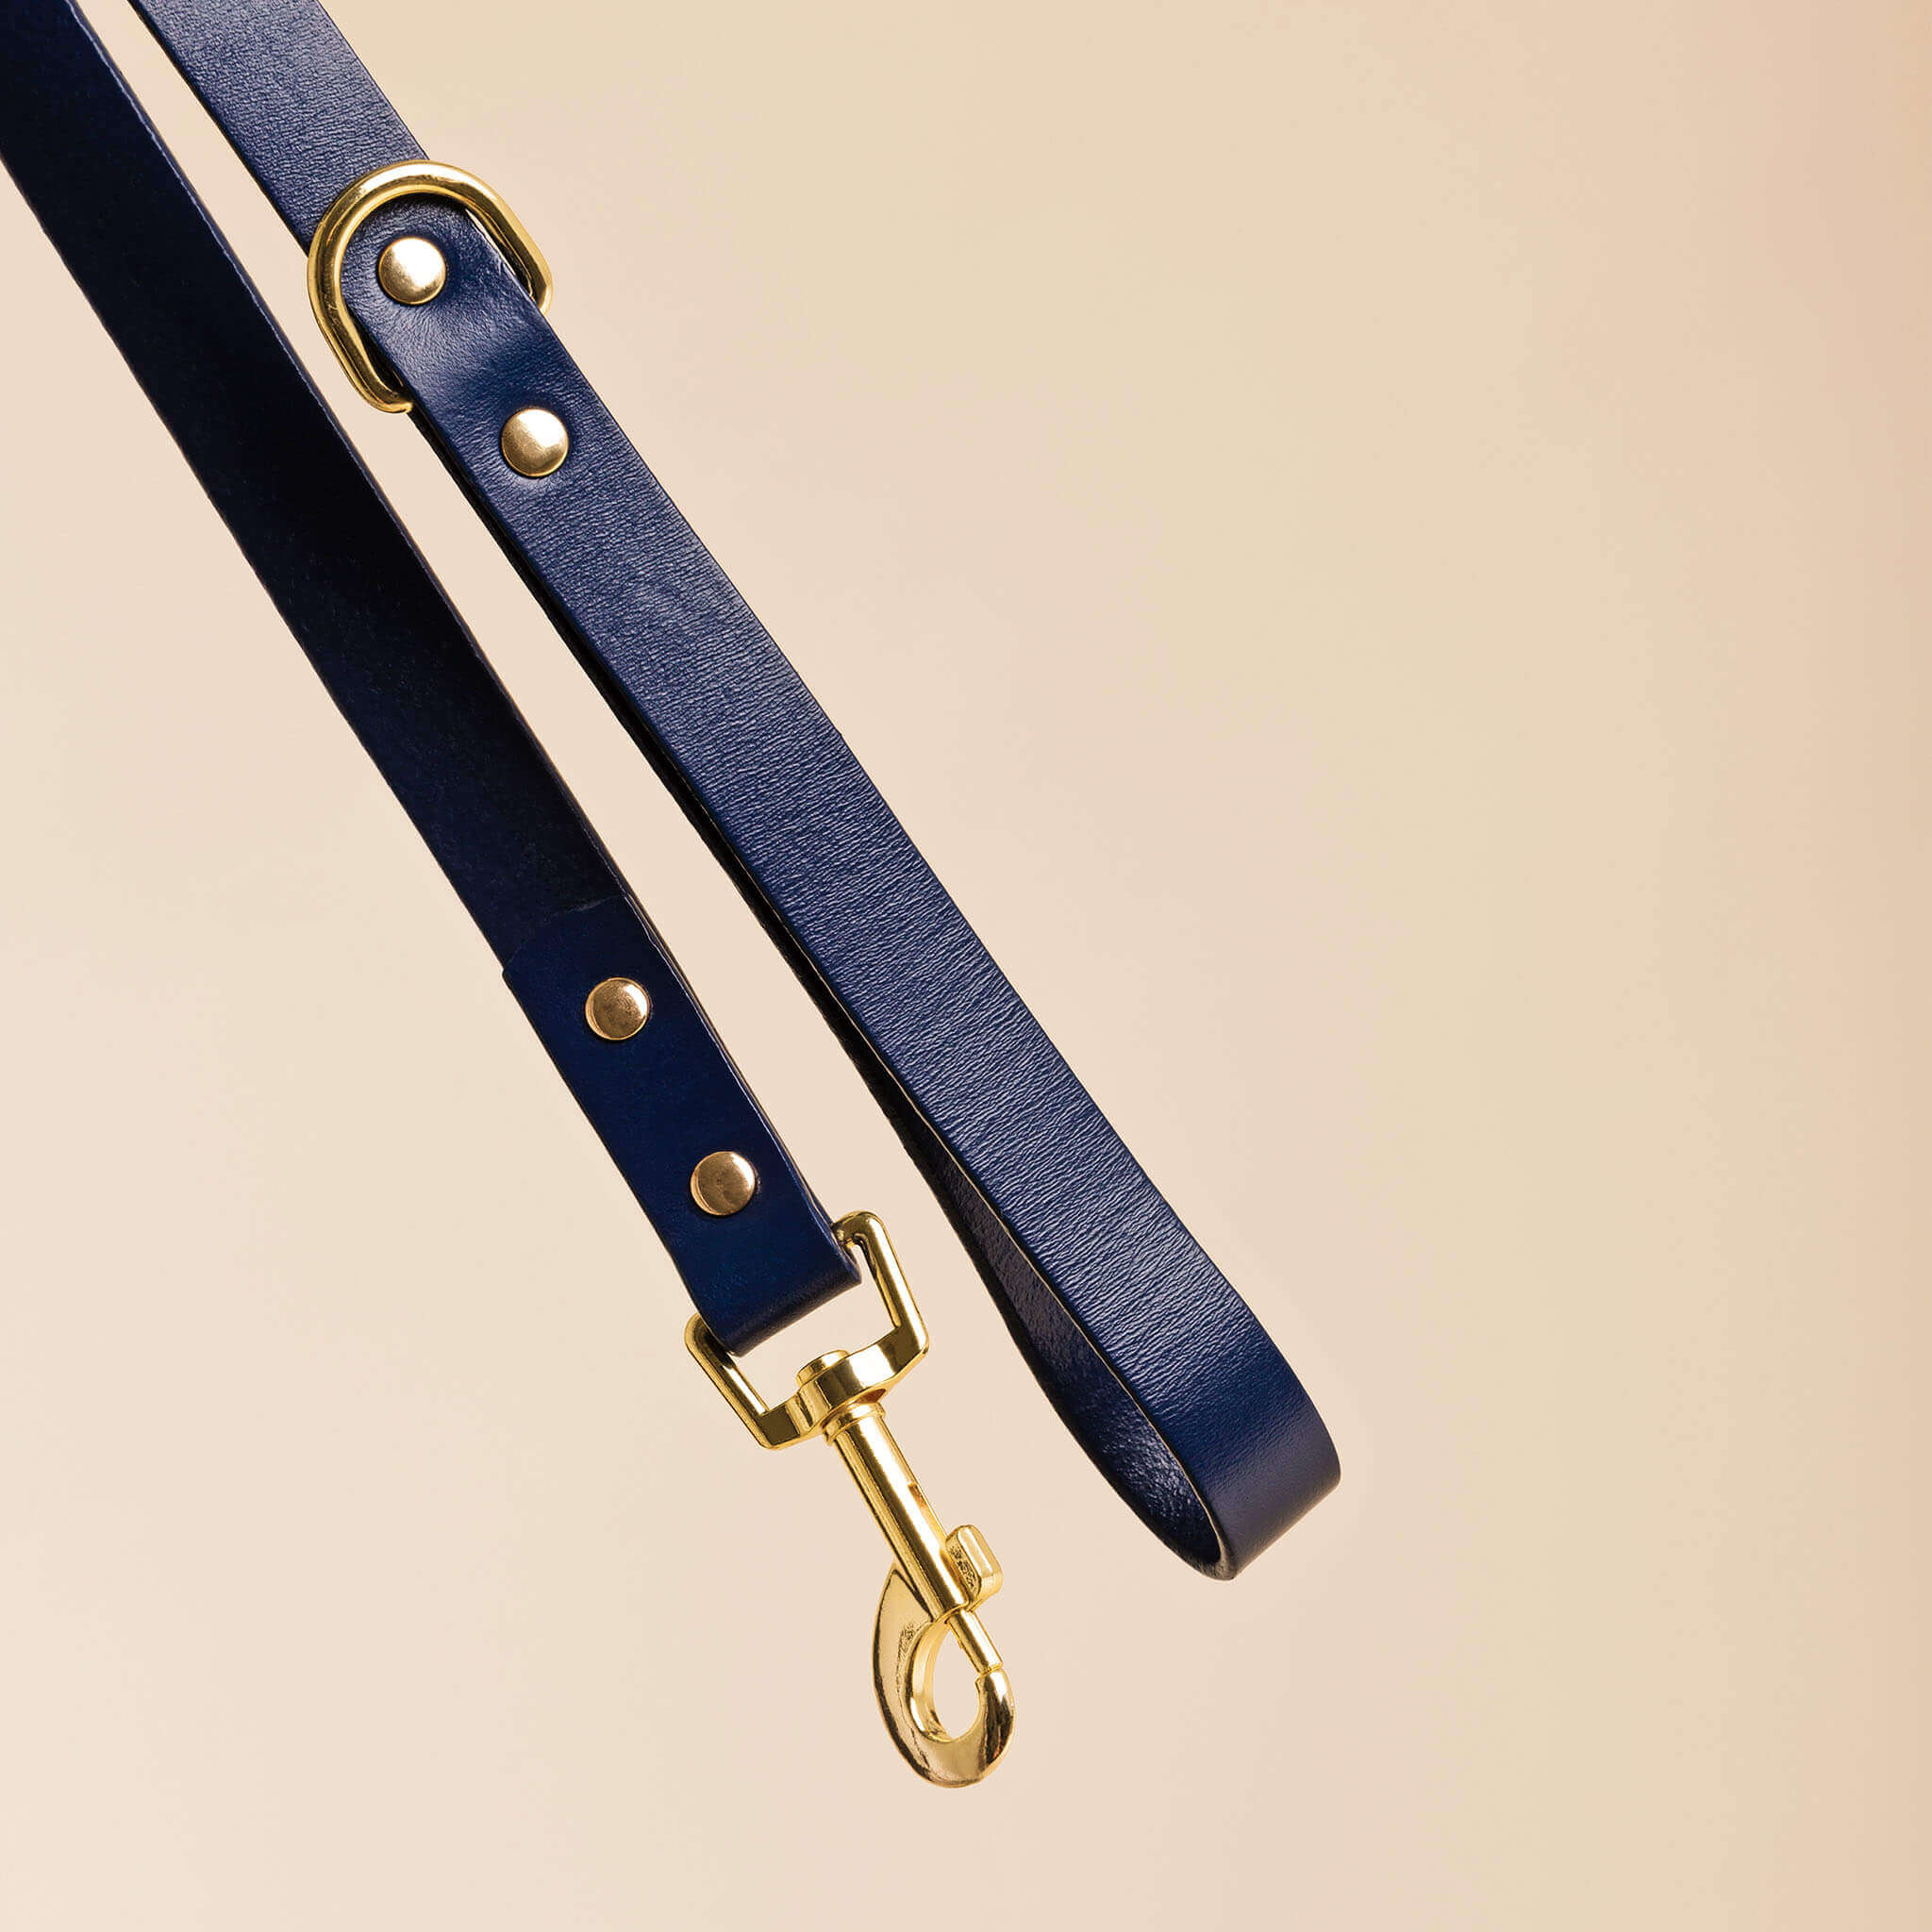 Luxury leather dog leash in ink.